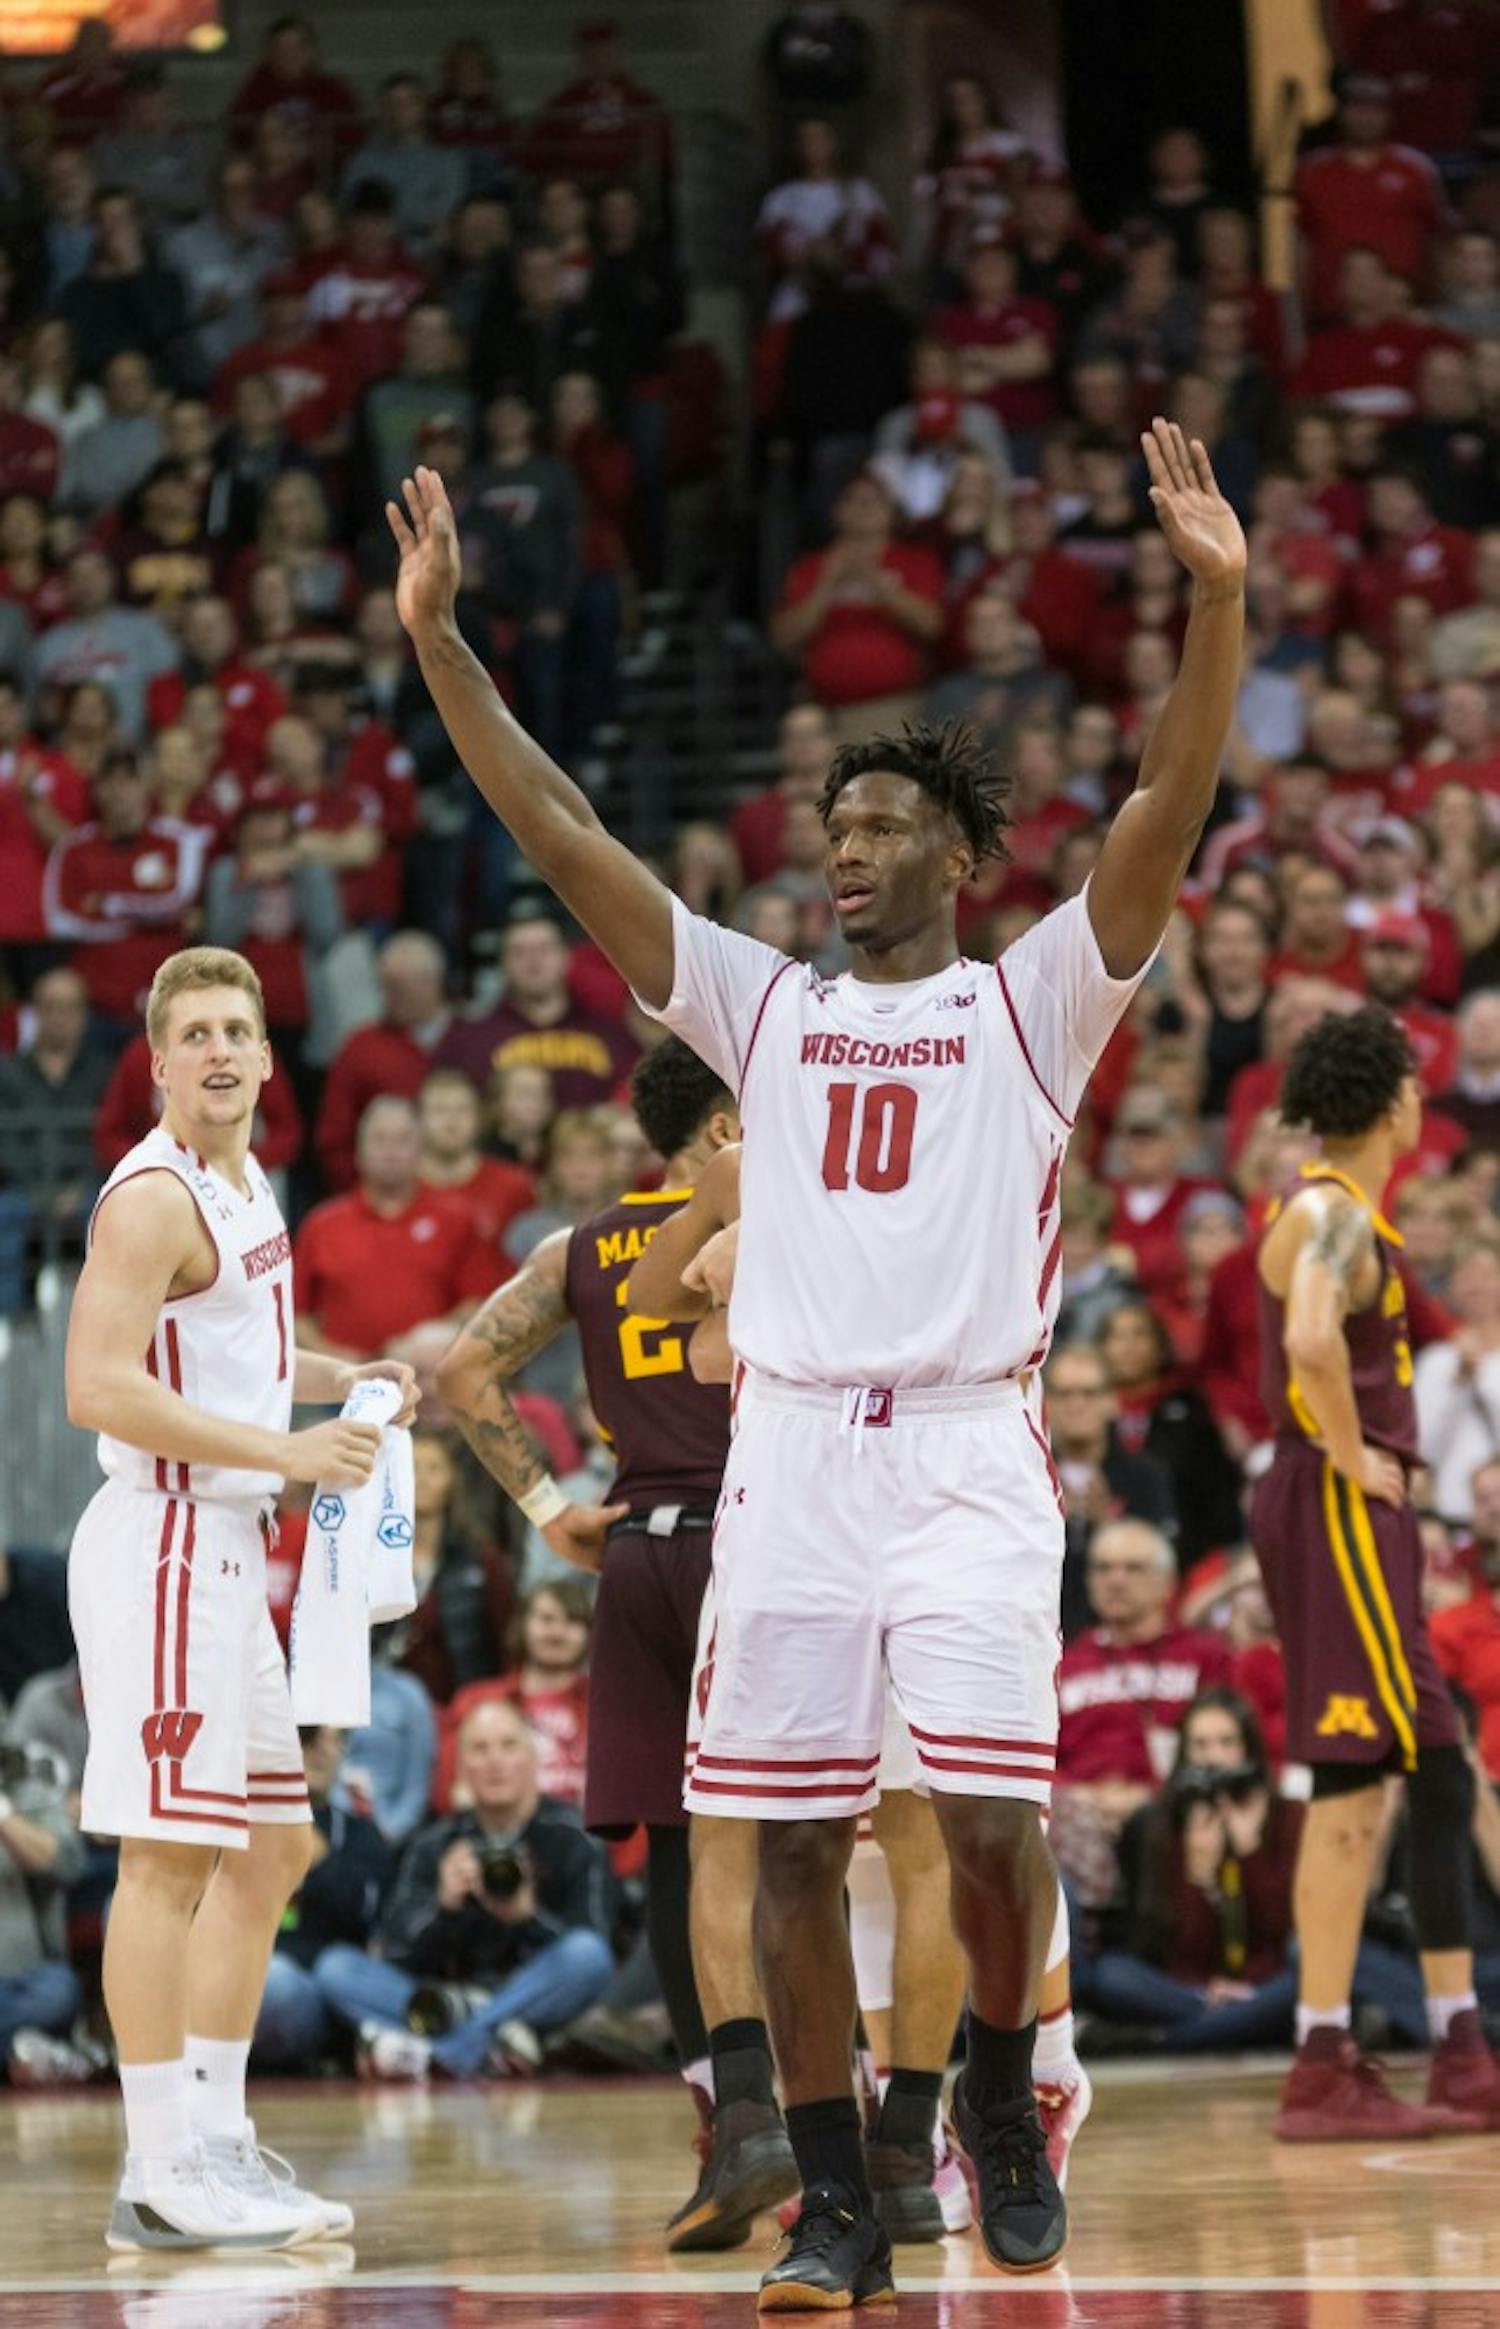 Nigel Hayes became a star while at UW, dazzling on the court while being outspoken about issues in the Madison community.&nbsp;